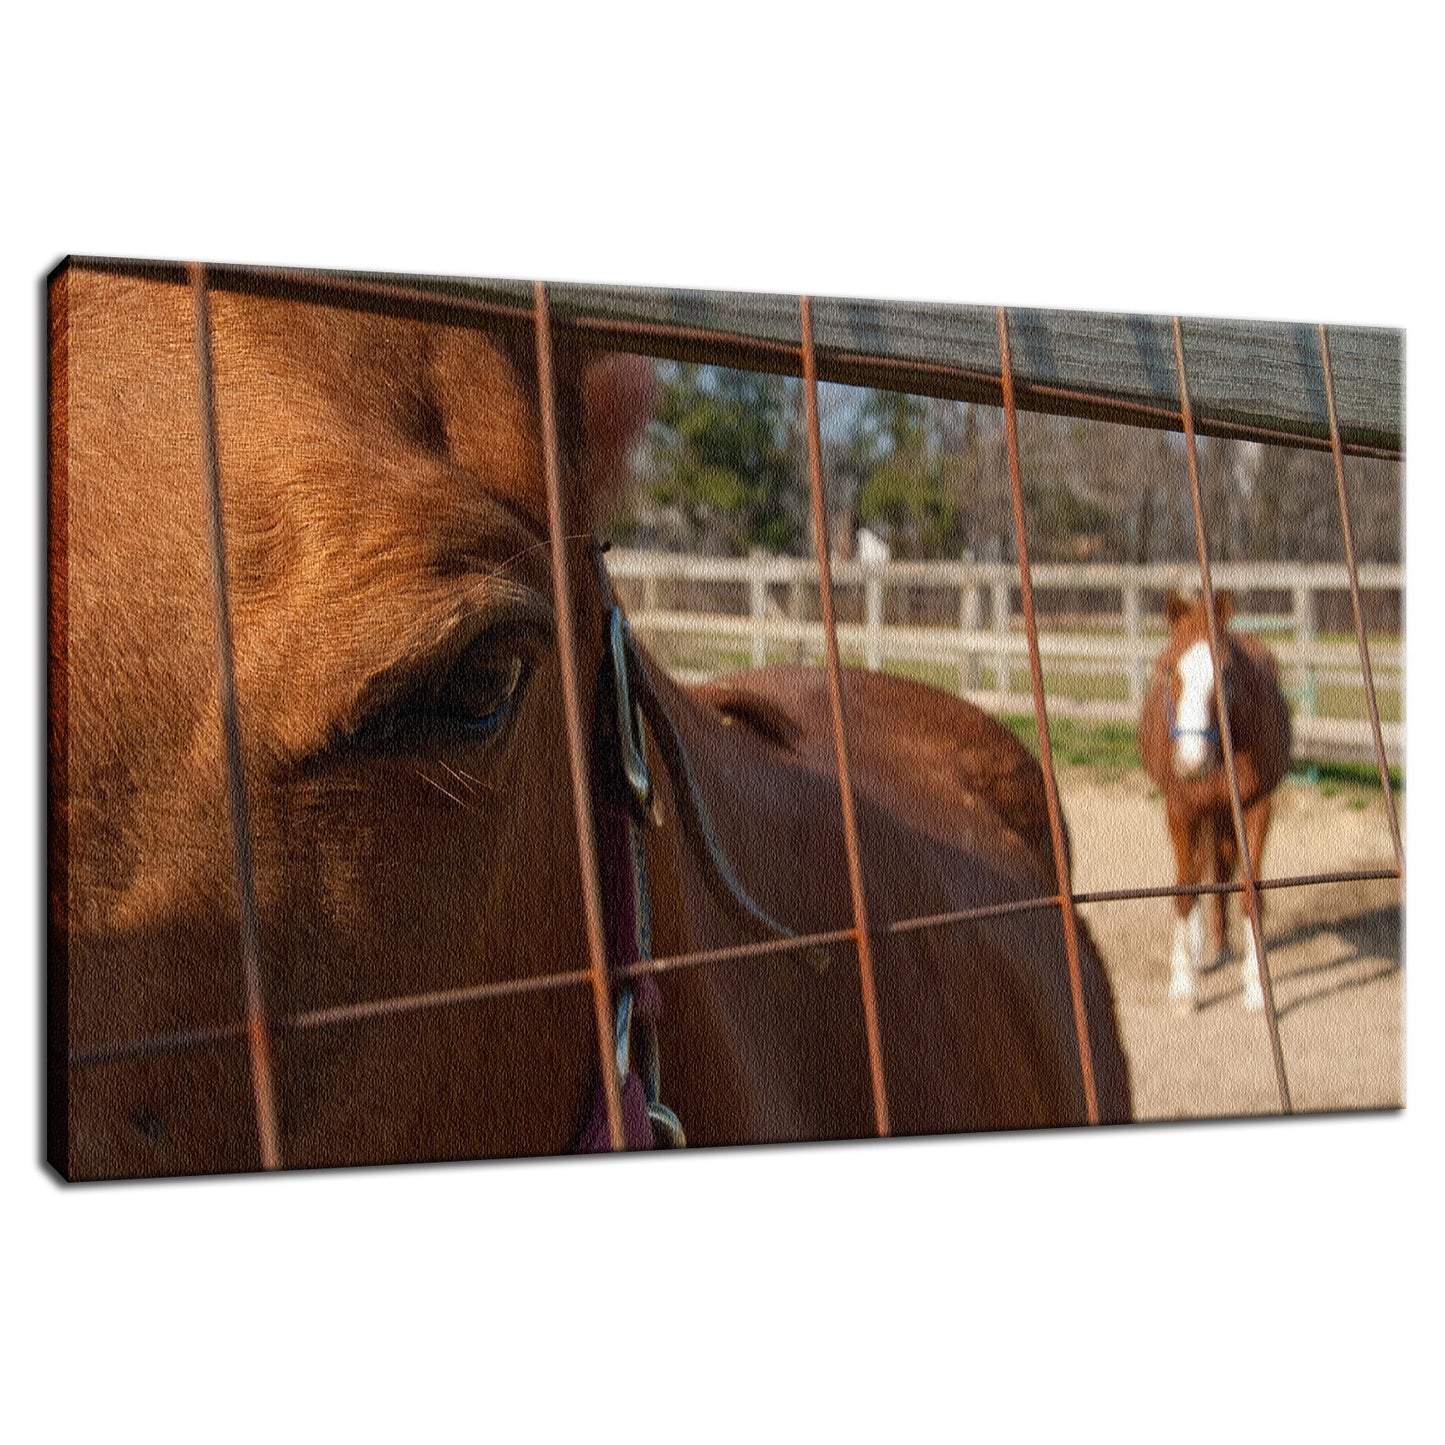 Fenced In Animal / Horse Photograph Fine Art Canvas & Unframed Wall Art Prints  - PIPAFINEART